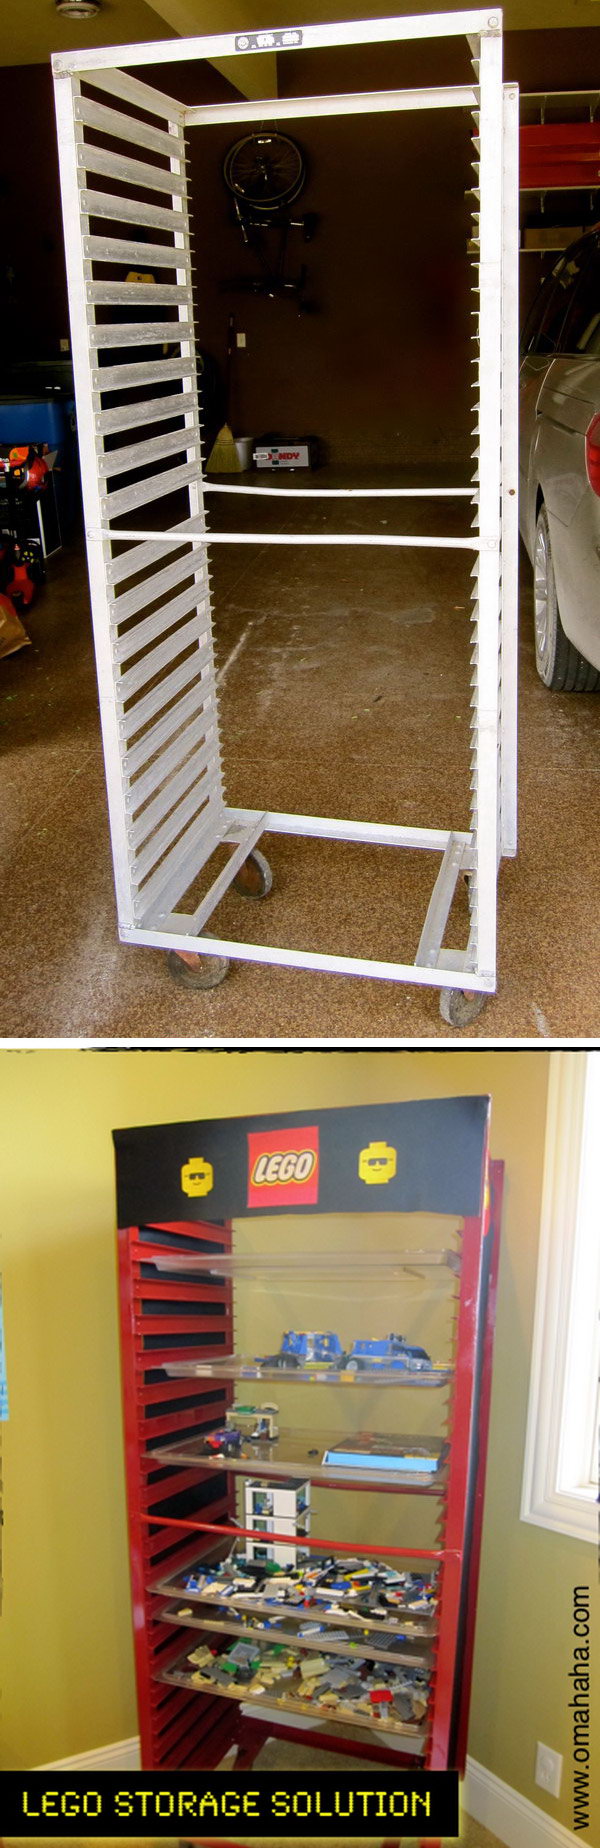 A LEGO storage made from a bun pan rack. Kids can stack their works in progress on a tray and slide them in the rack. 